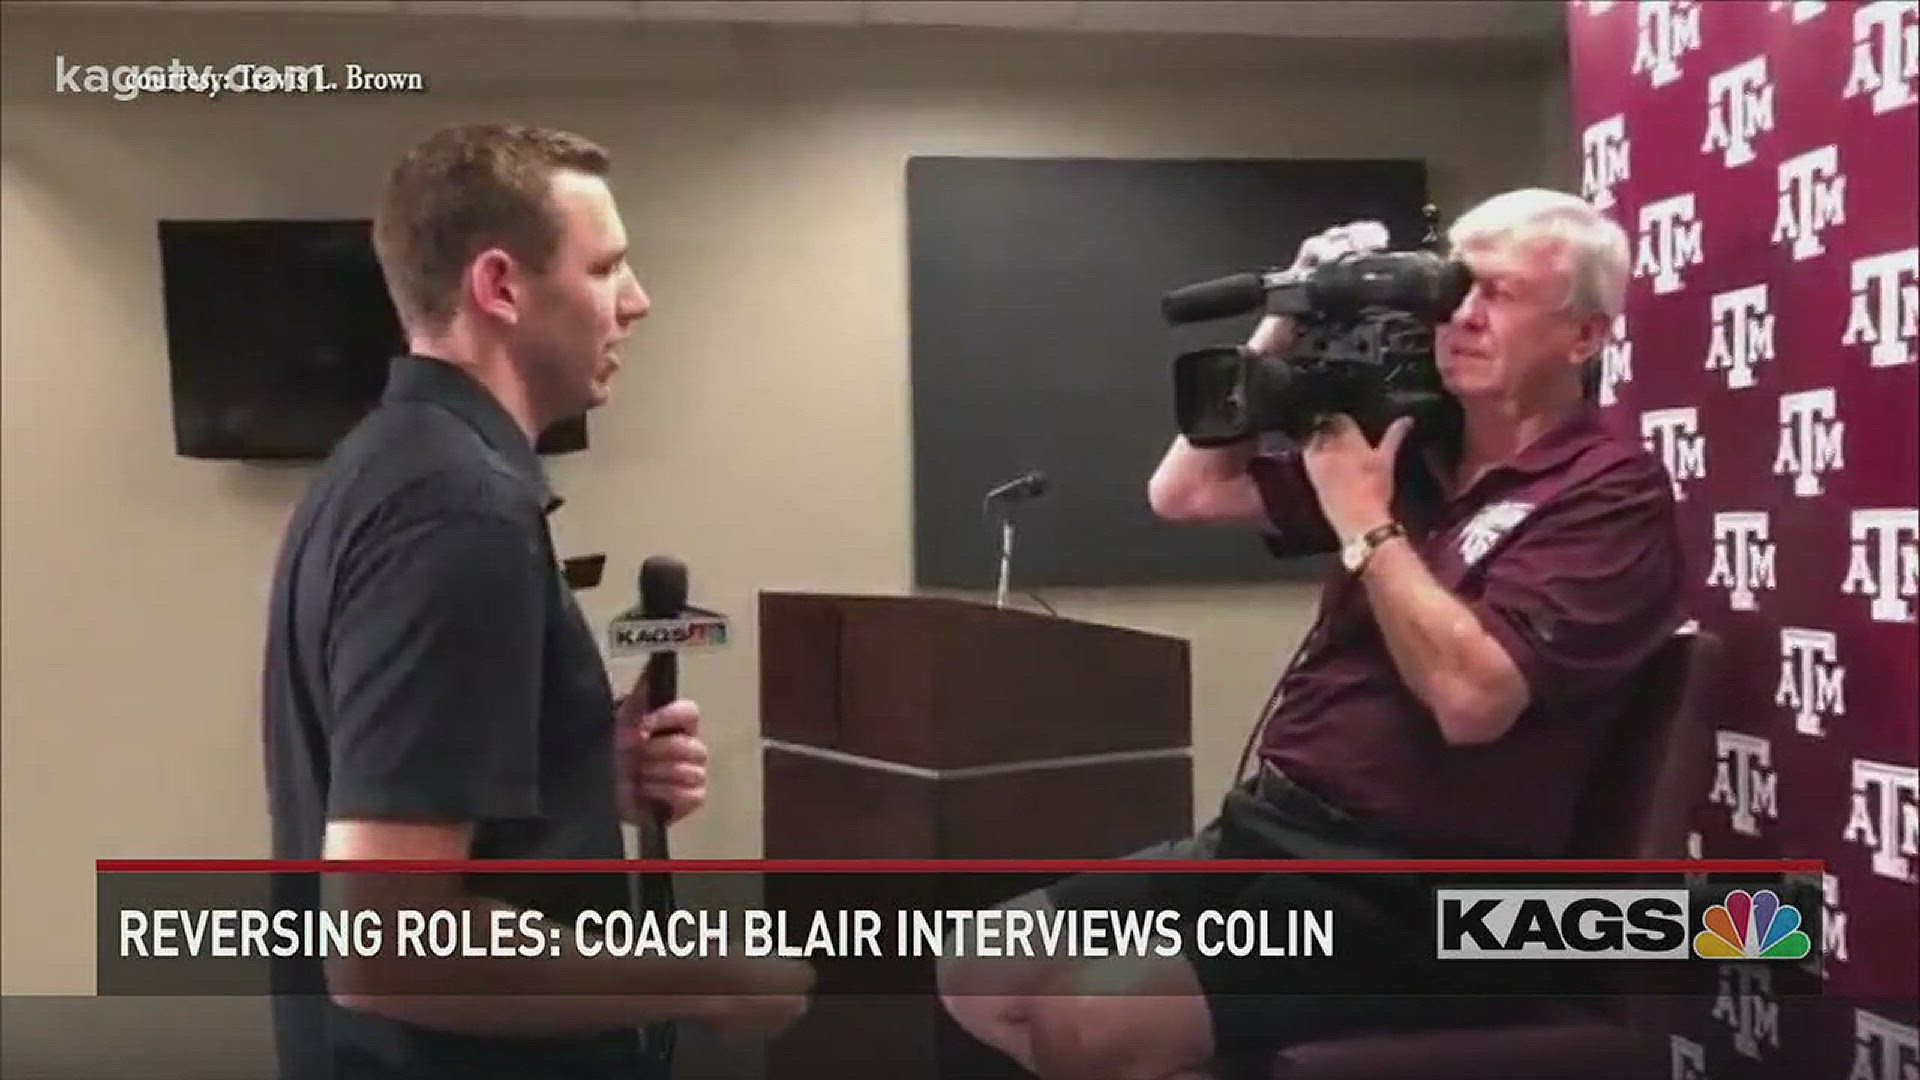 Coach Blair operated our camera and interviewed Colin Deaver.